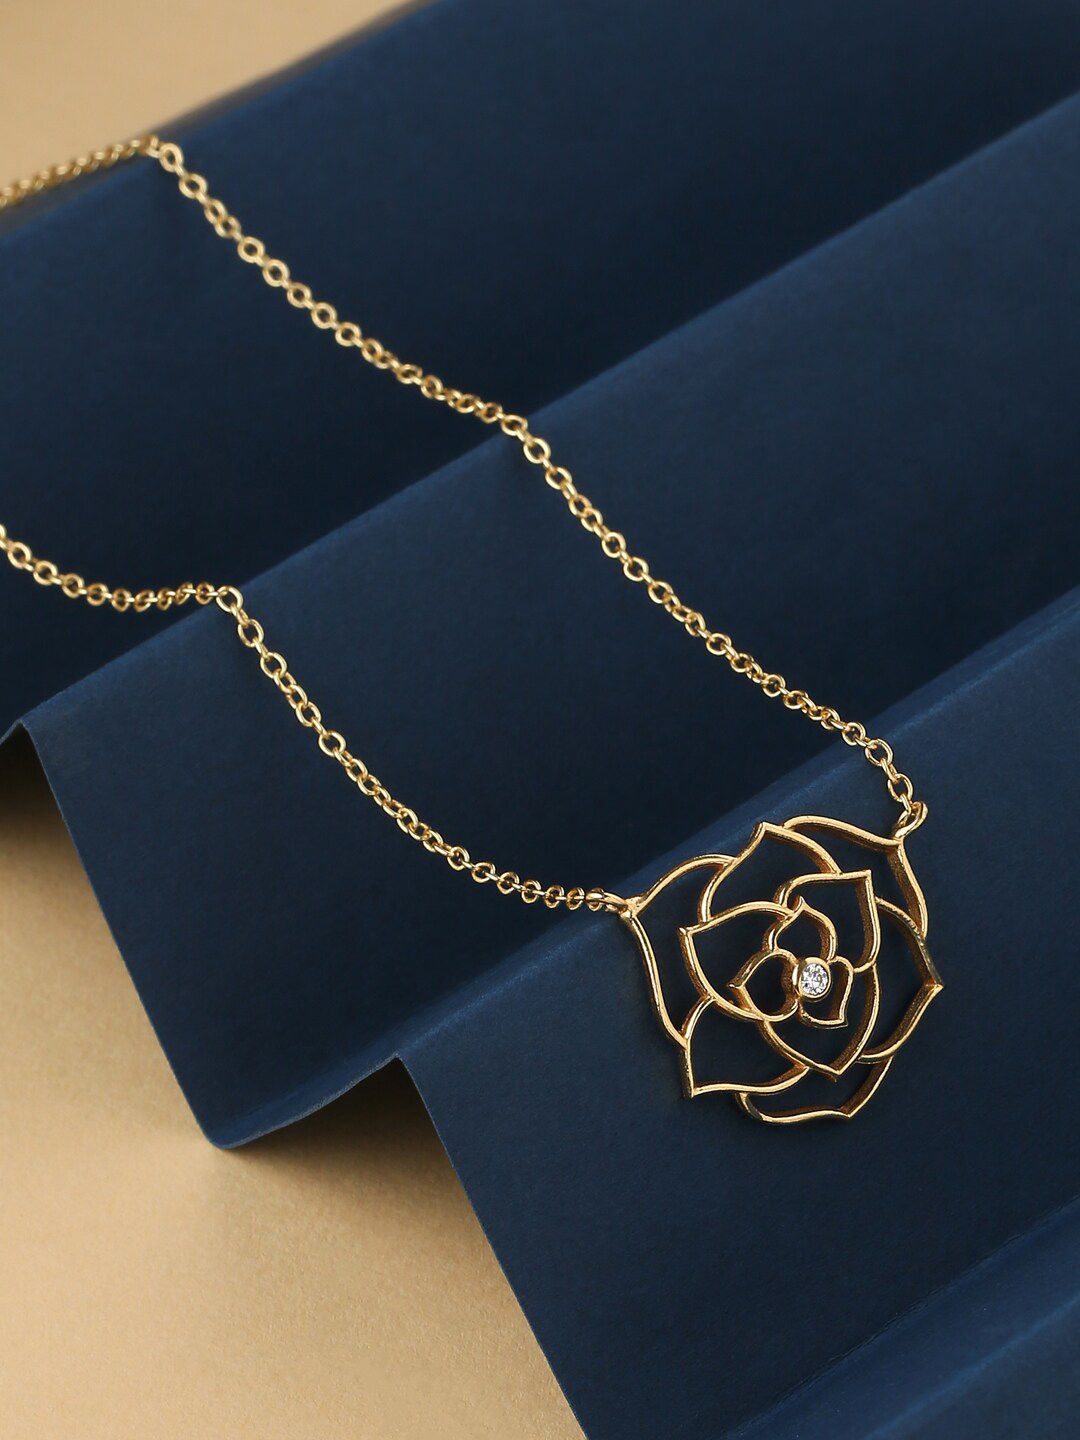 kashwini Gold-Plated & White Brass Flower Necklace Price in India